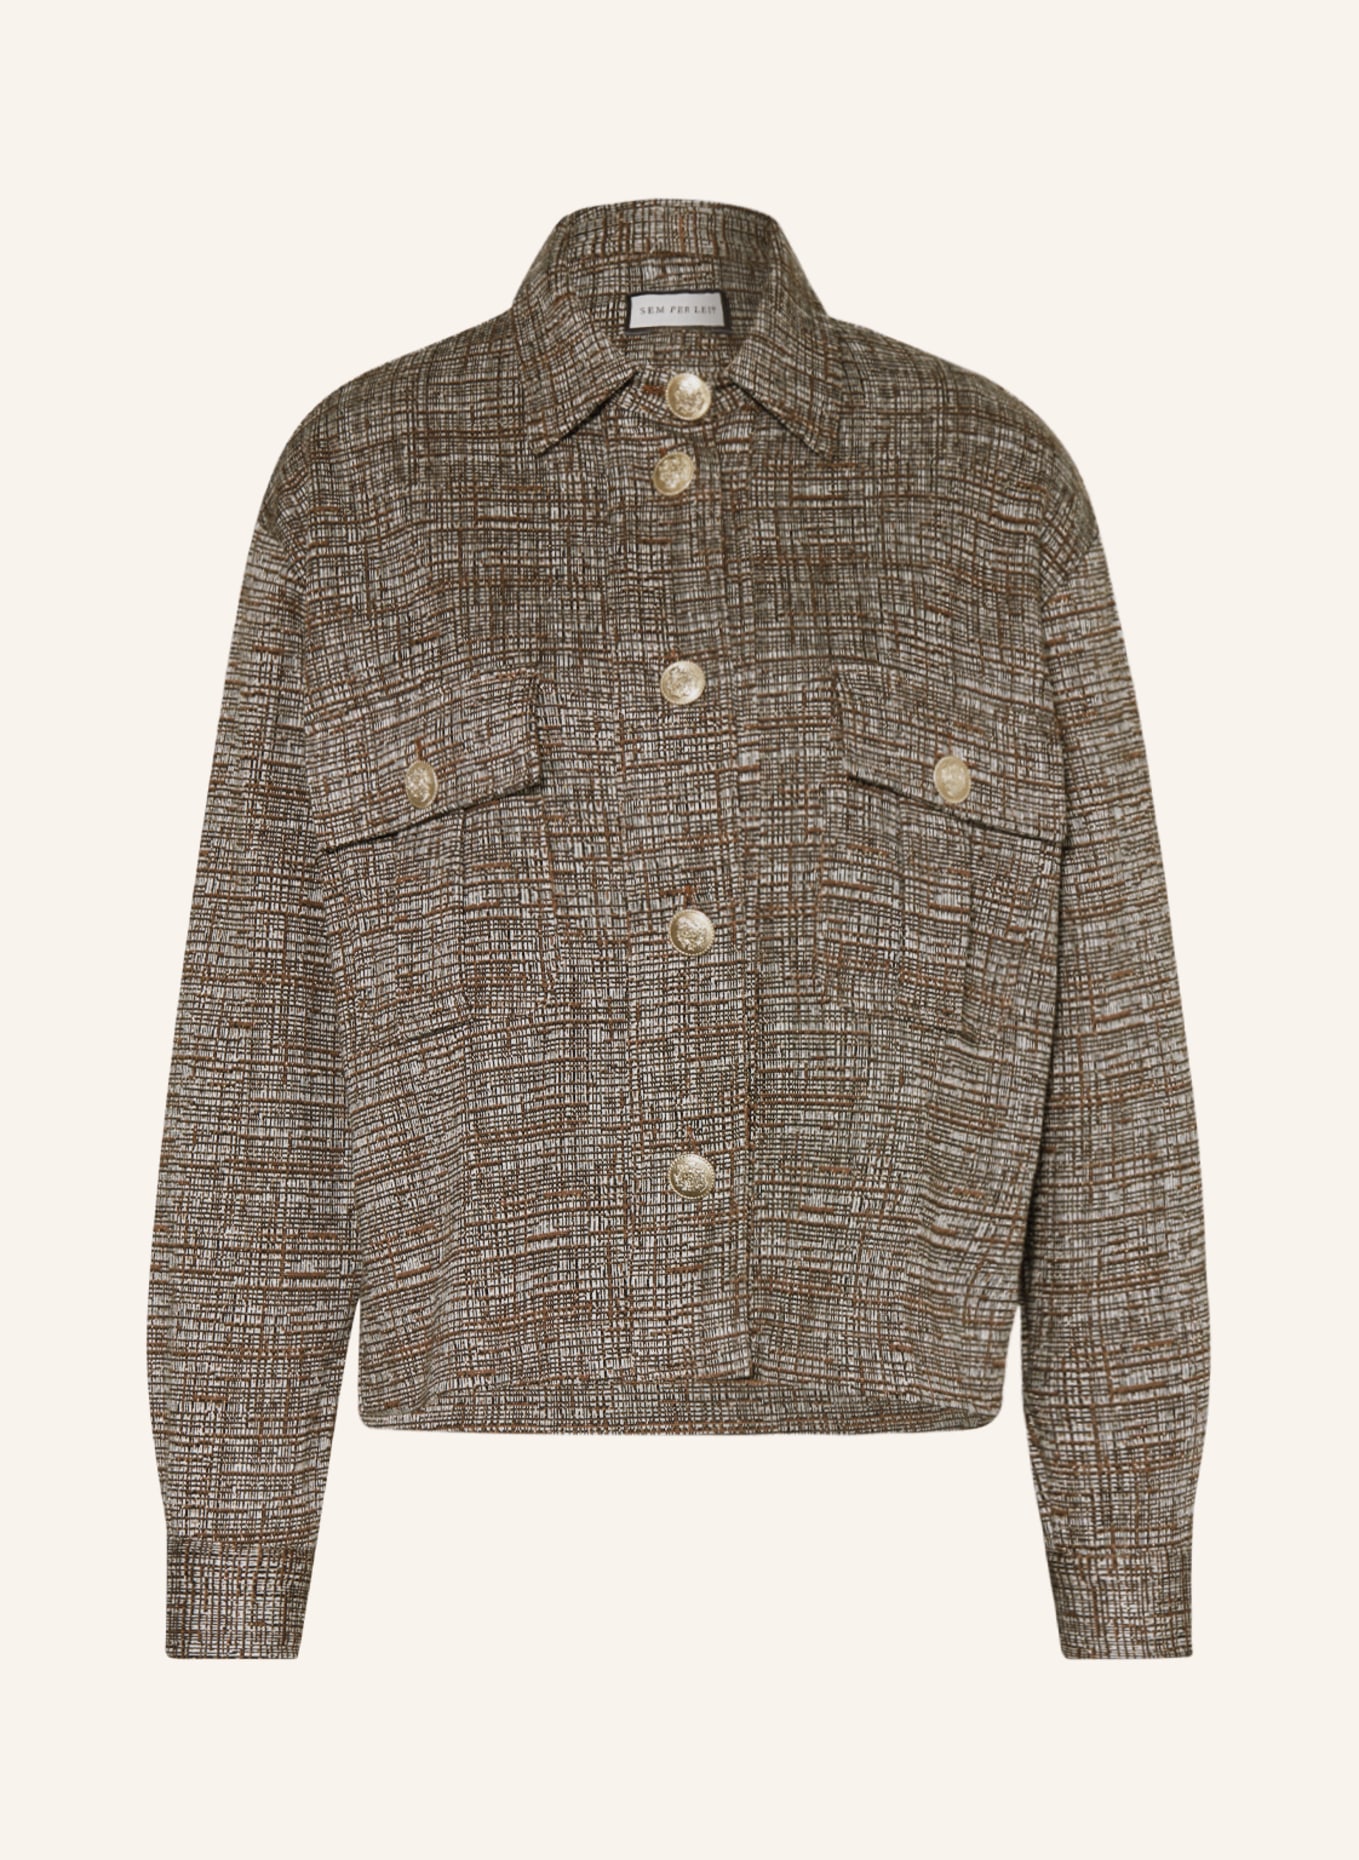 SEM PER LEI Boxy jacket with glitter thread, Color: BROWN/ LIGHT GRAY (Image 1)